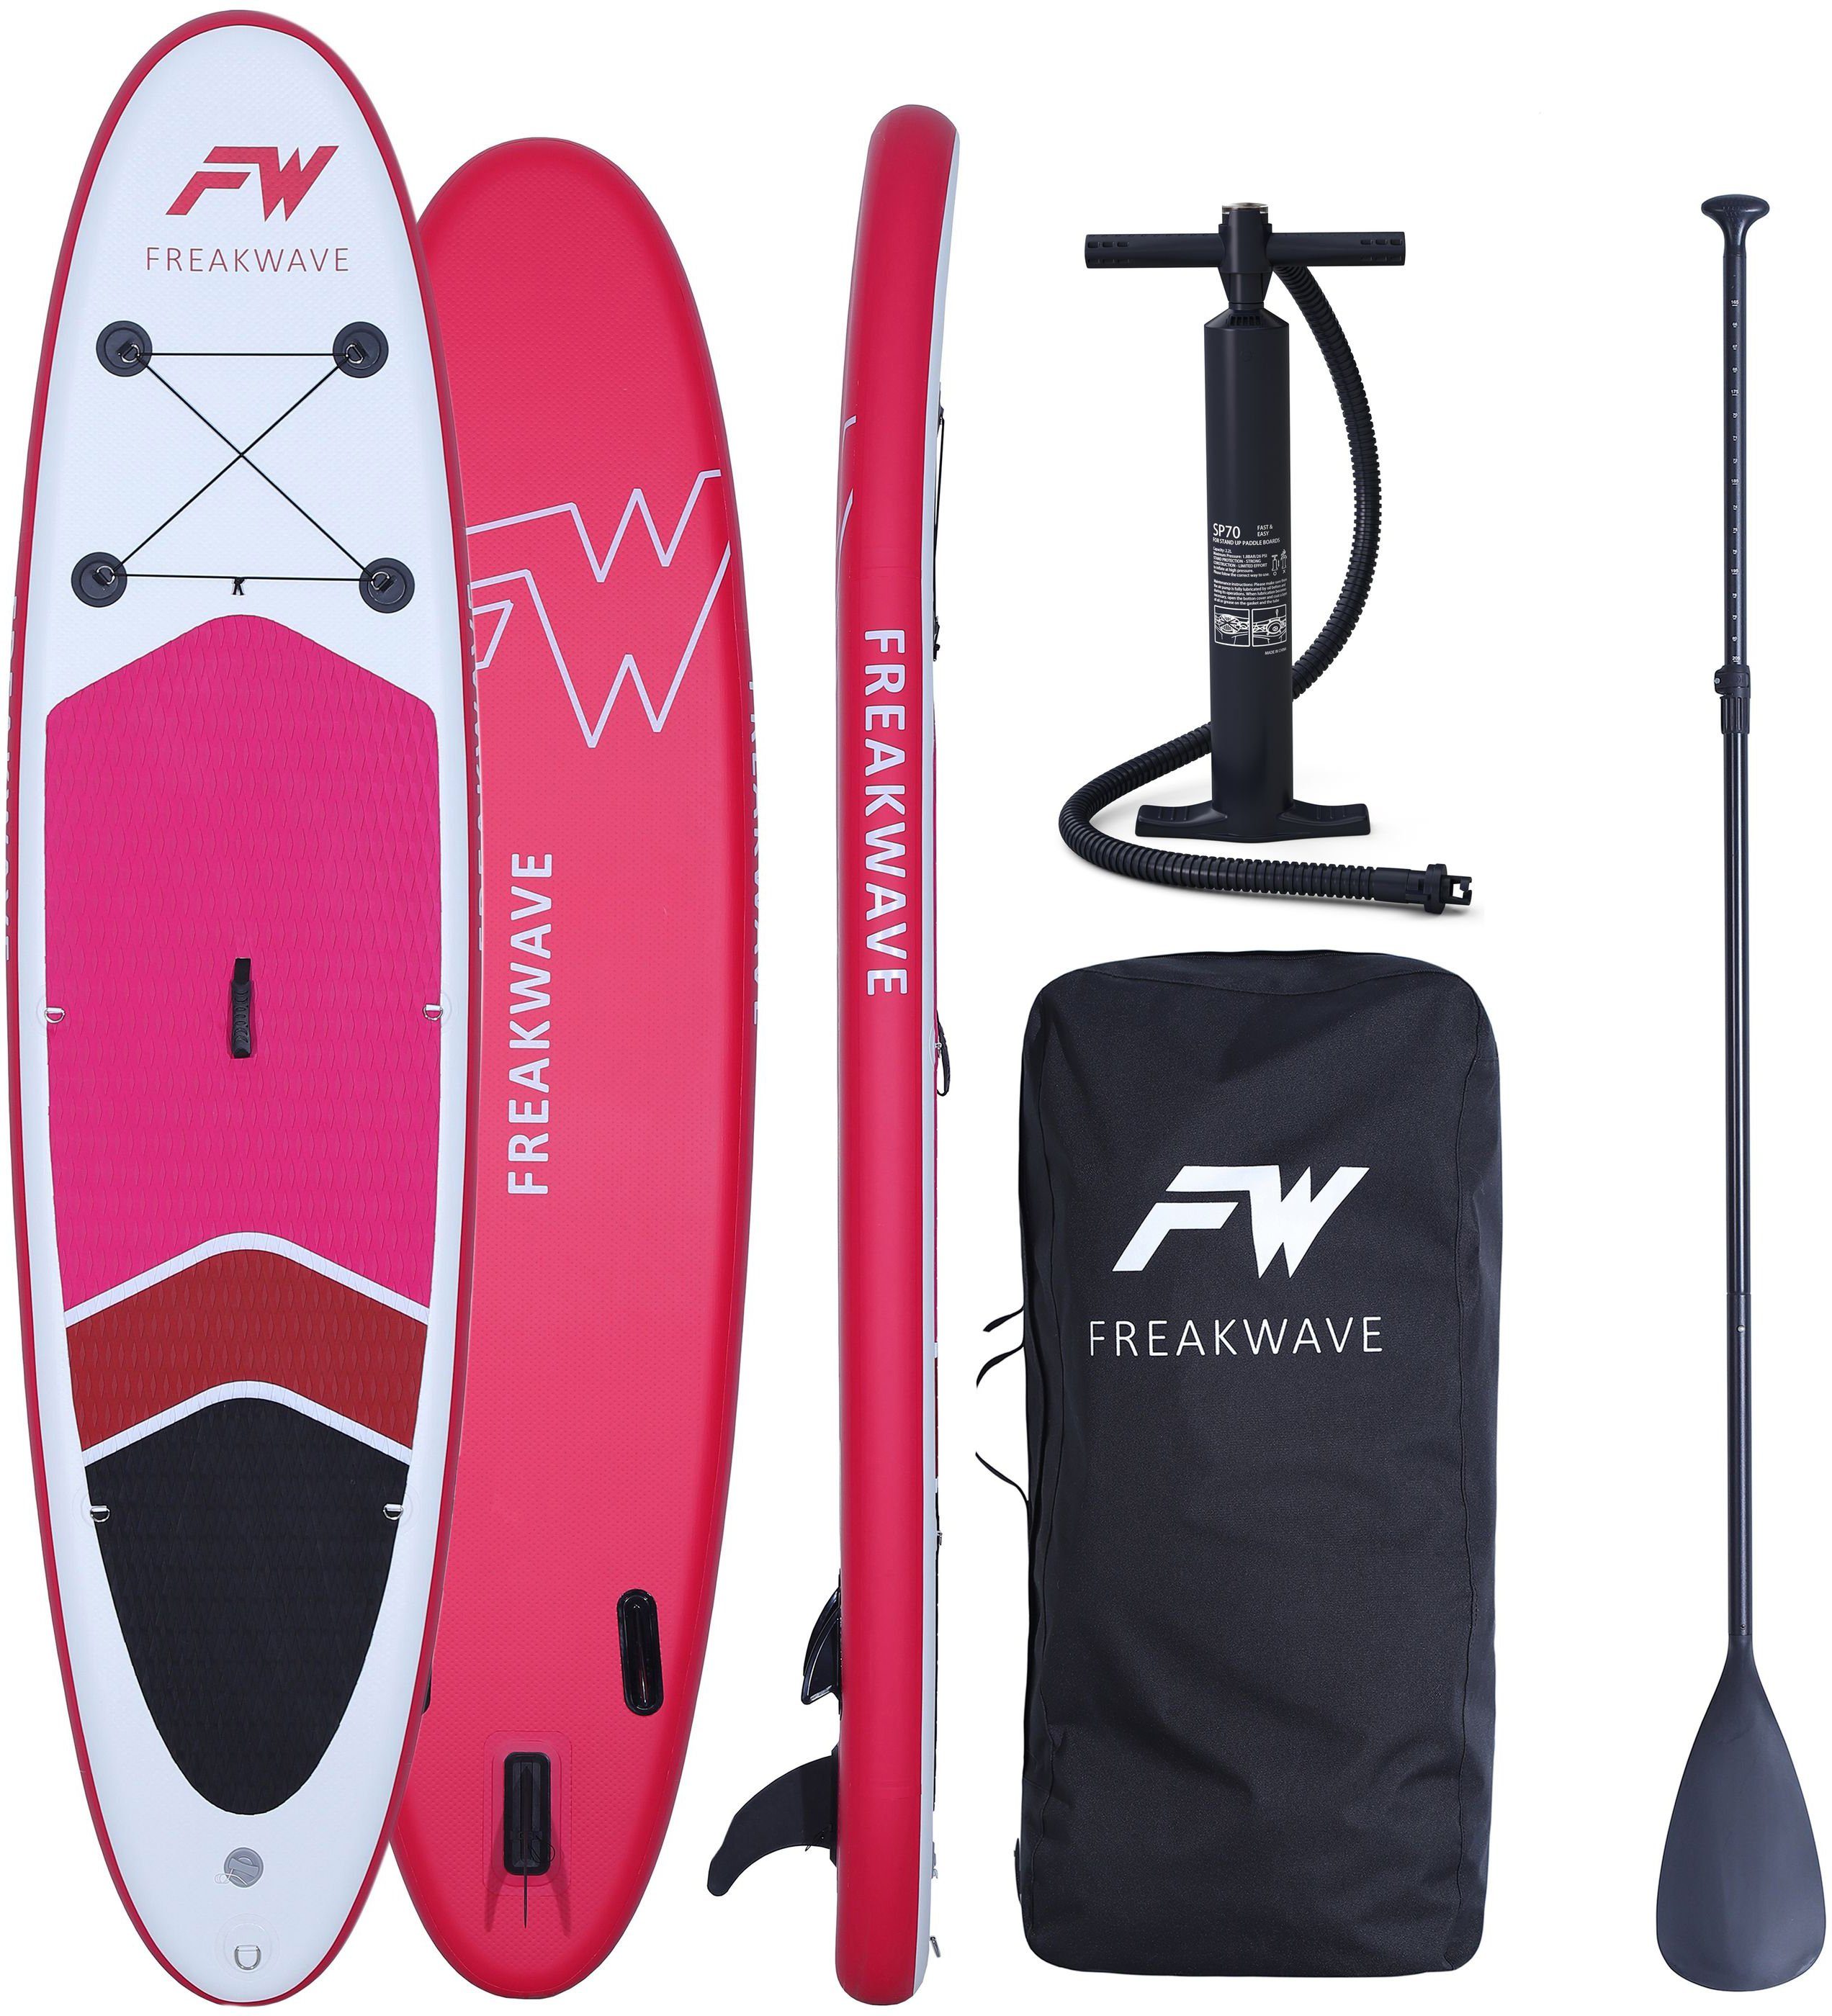 SUP FREAKWAVE CORAL Pink inflatable 24102 320 x 76 x 15 cm Komplettset 8,5kg 